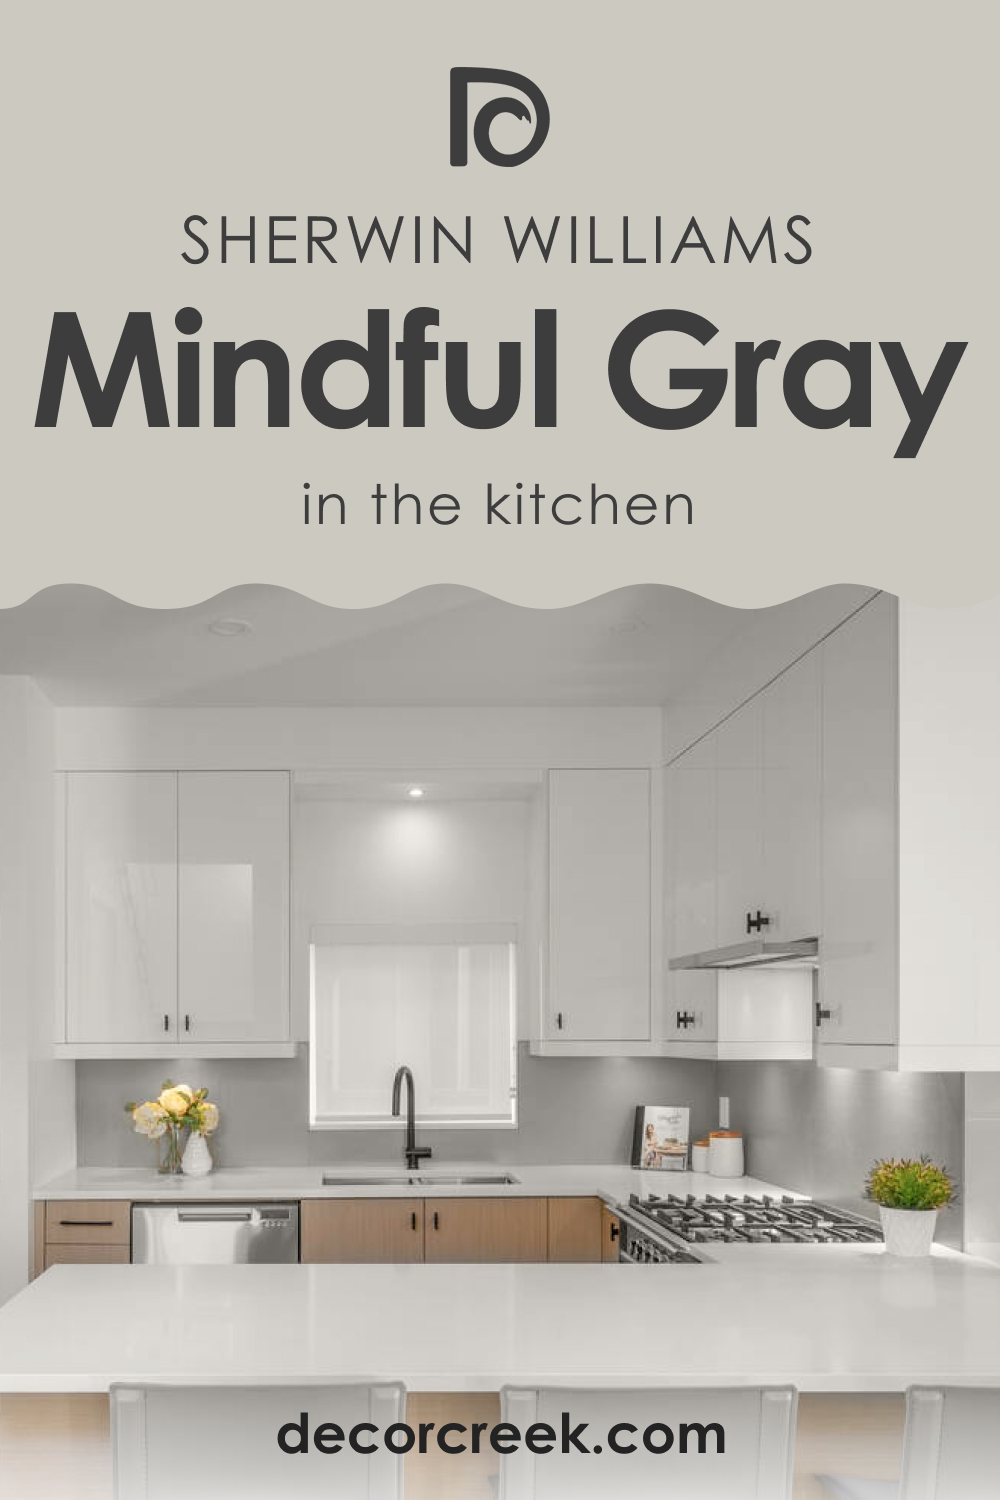 How to Use SW 7016 Mindful Gray in the Kitchen?